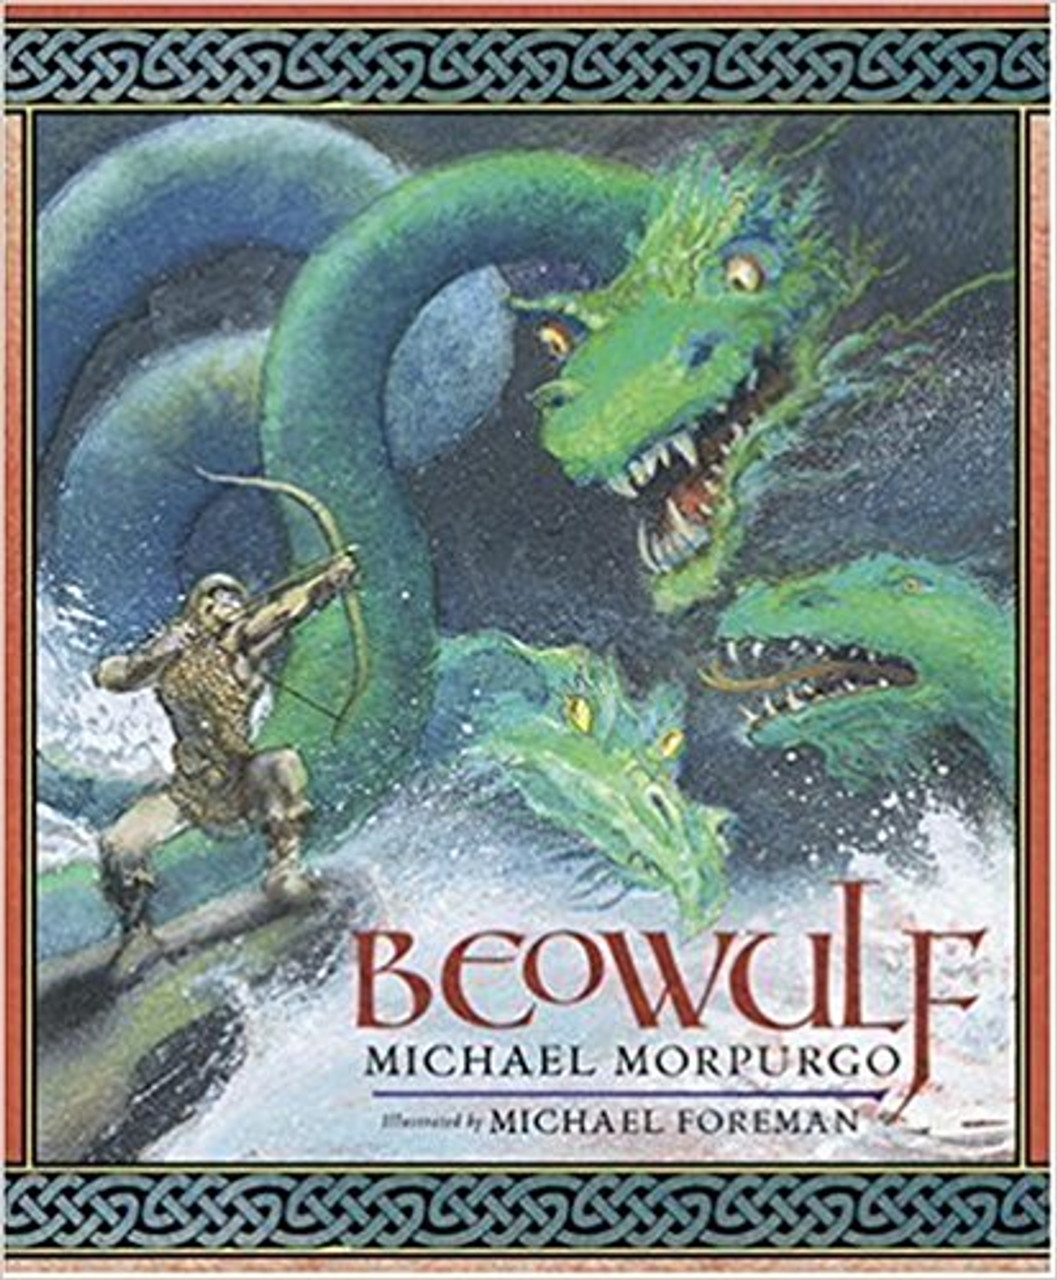 Told for more than a thousand years, this classic epic is given new life in a graphic novel that honors the spirit of the original tale of the heroic warrior Beowulf and his battle against the monstrous Grendel. Full color. Young adult.